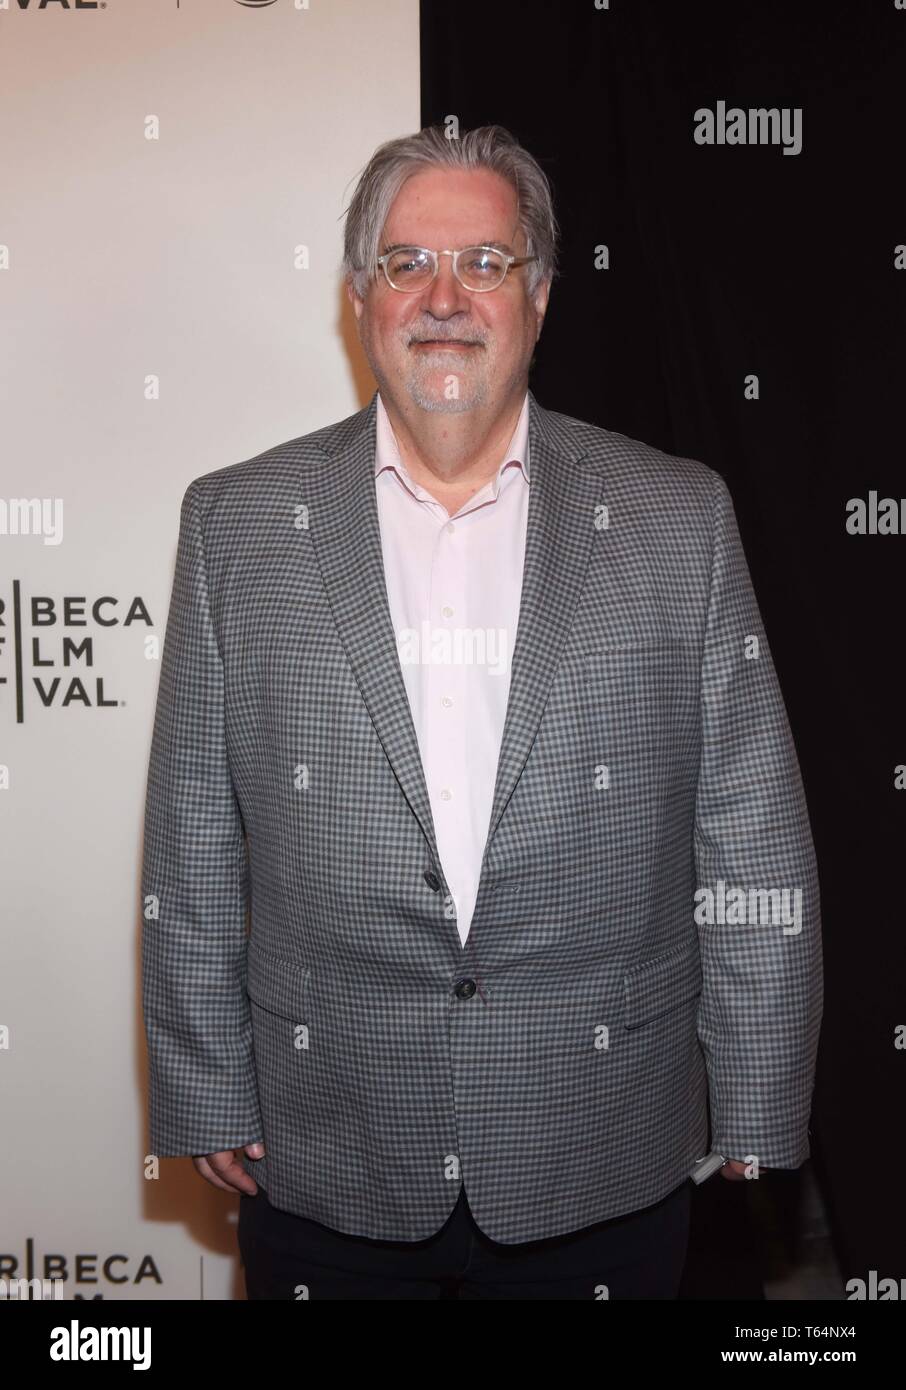 New York, New York, USA. 28th Apr, 2019. Matt Groening attends ‘The Simpsons 30th Anniversary' during the 2019 Tribeca Film Festival at The Stella Artois Theatre Credit: Bmcc Tpac On April 28, 2019 In New York City. Photo: Jeremy Smith/Image Space/Media Punch/Alamy Live News Stock Photo